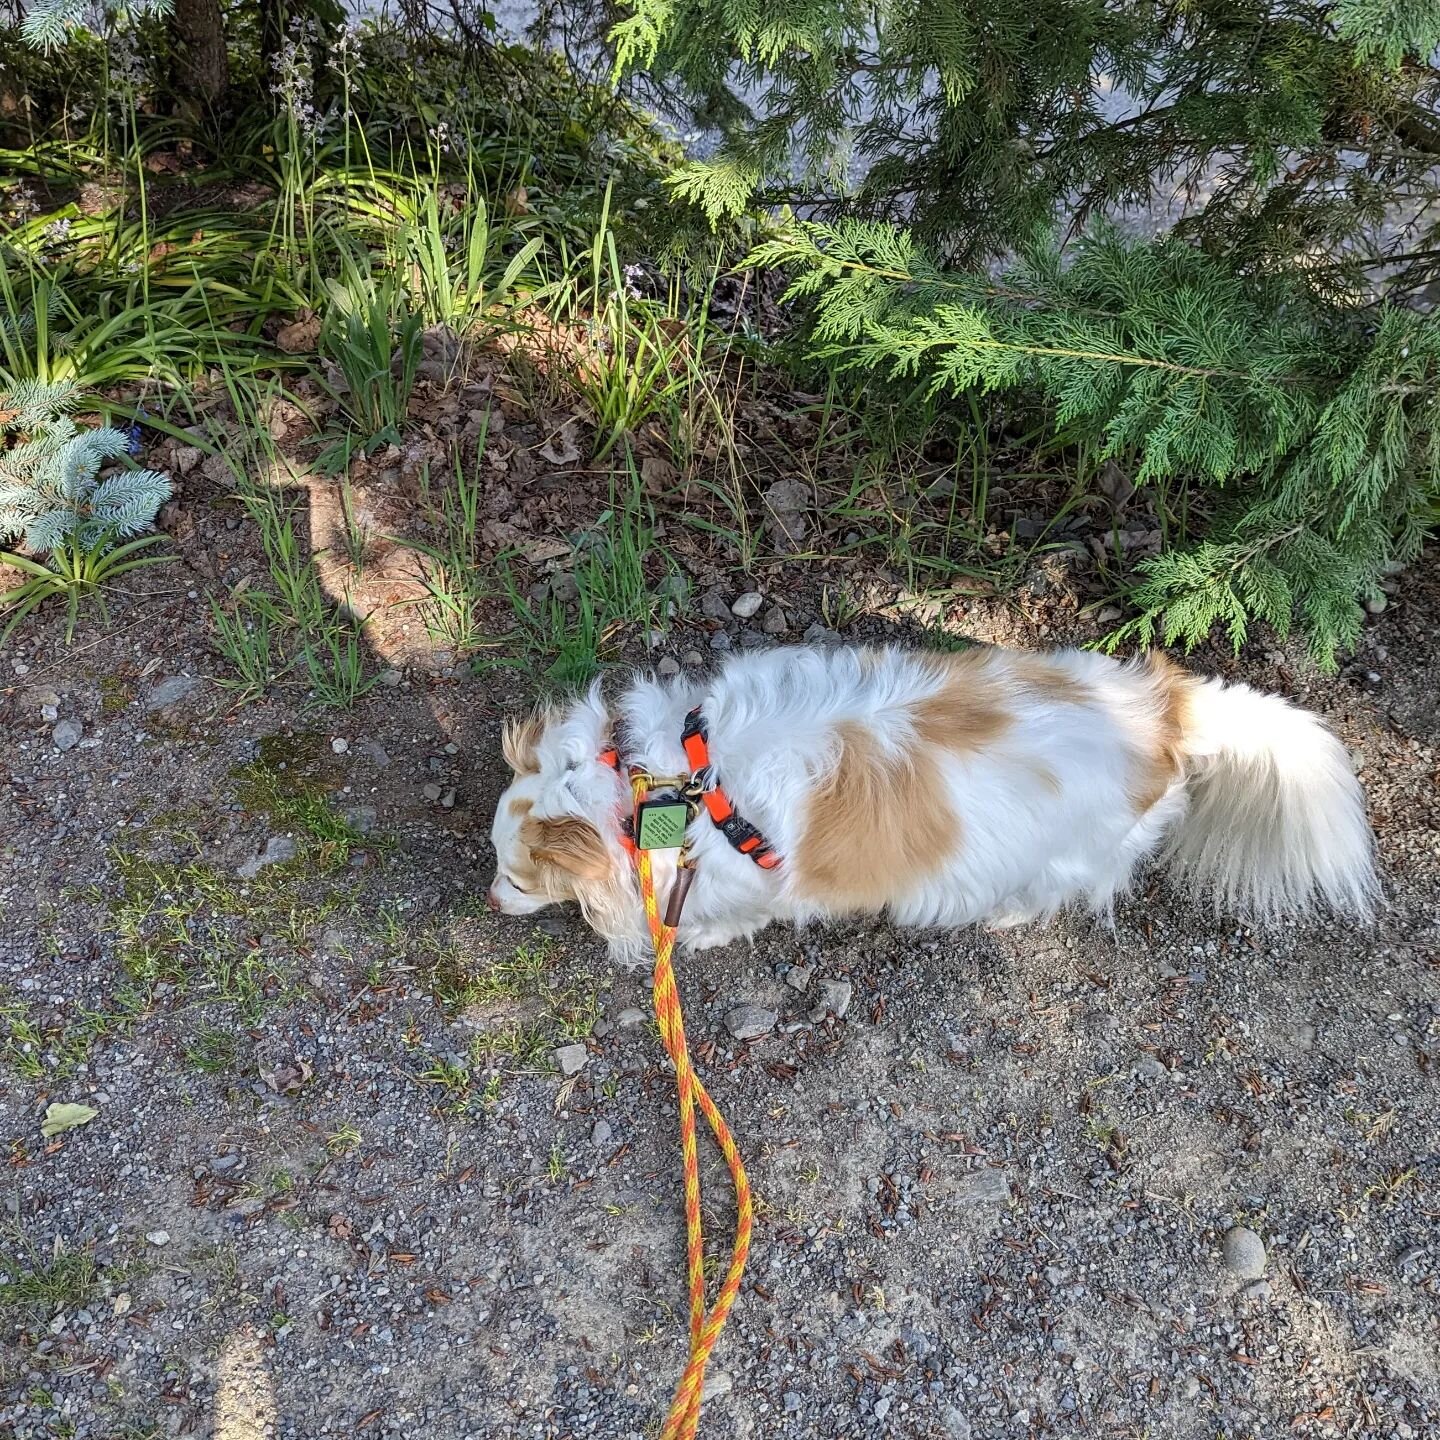 On the trail, sniffing